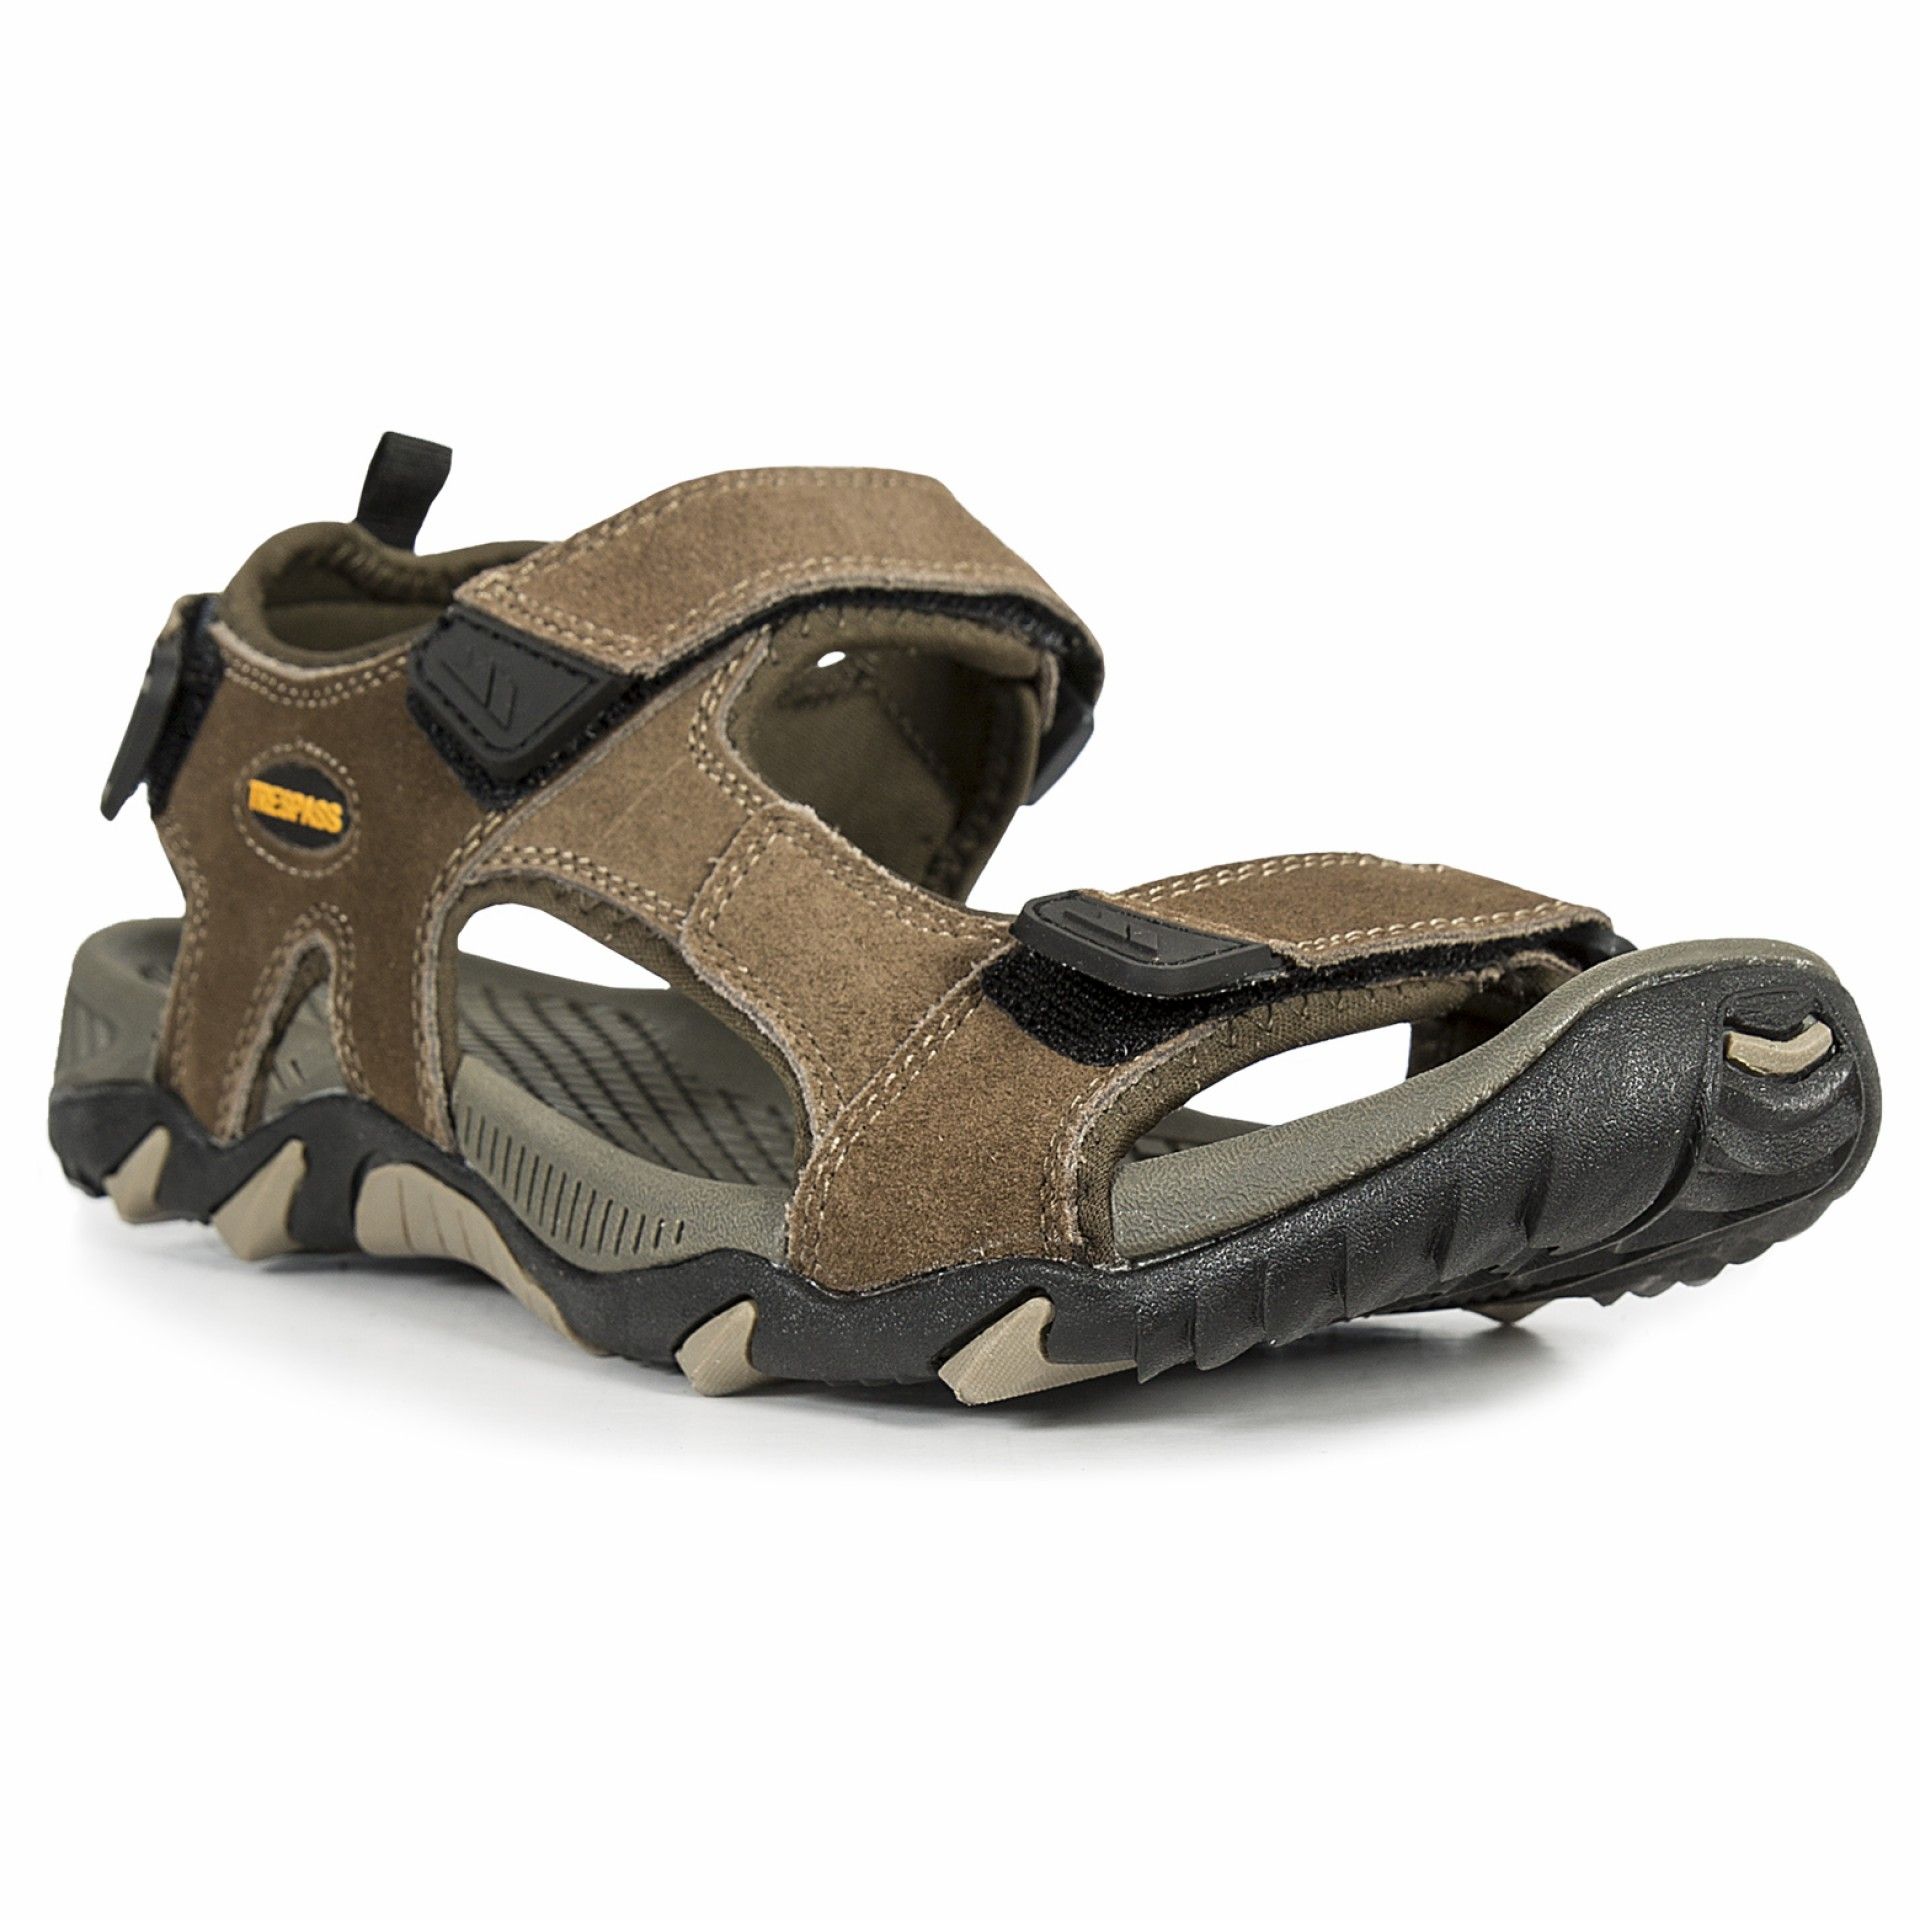 Mens walking sandals. Fully lined upper with cushioning. Positive fit 3-point adjustment. Cushioned and moulded footbed. Durable traction outsole. Upper: Suede/Textile, Midsole: Moulded EVA, Outsole: Rubber.